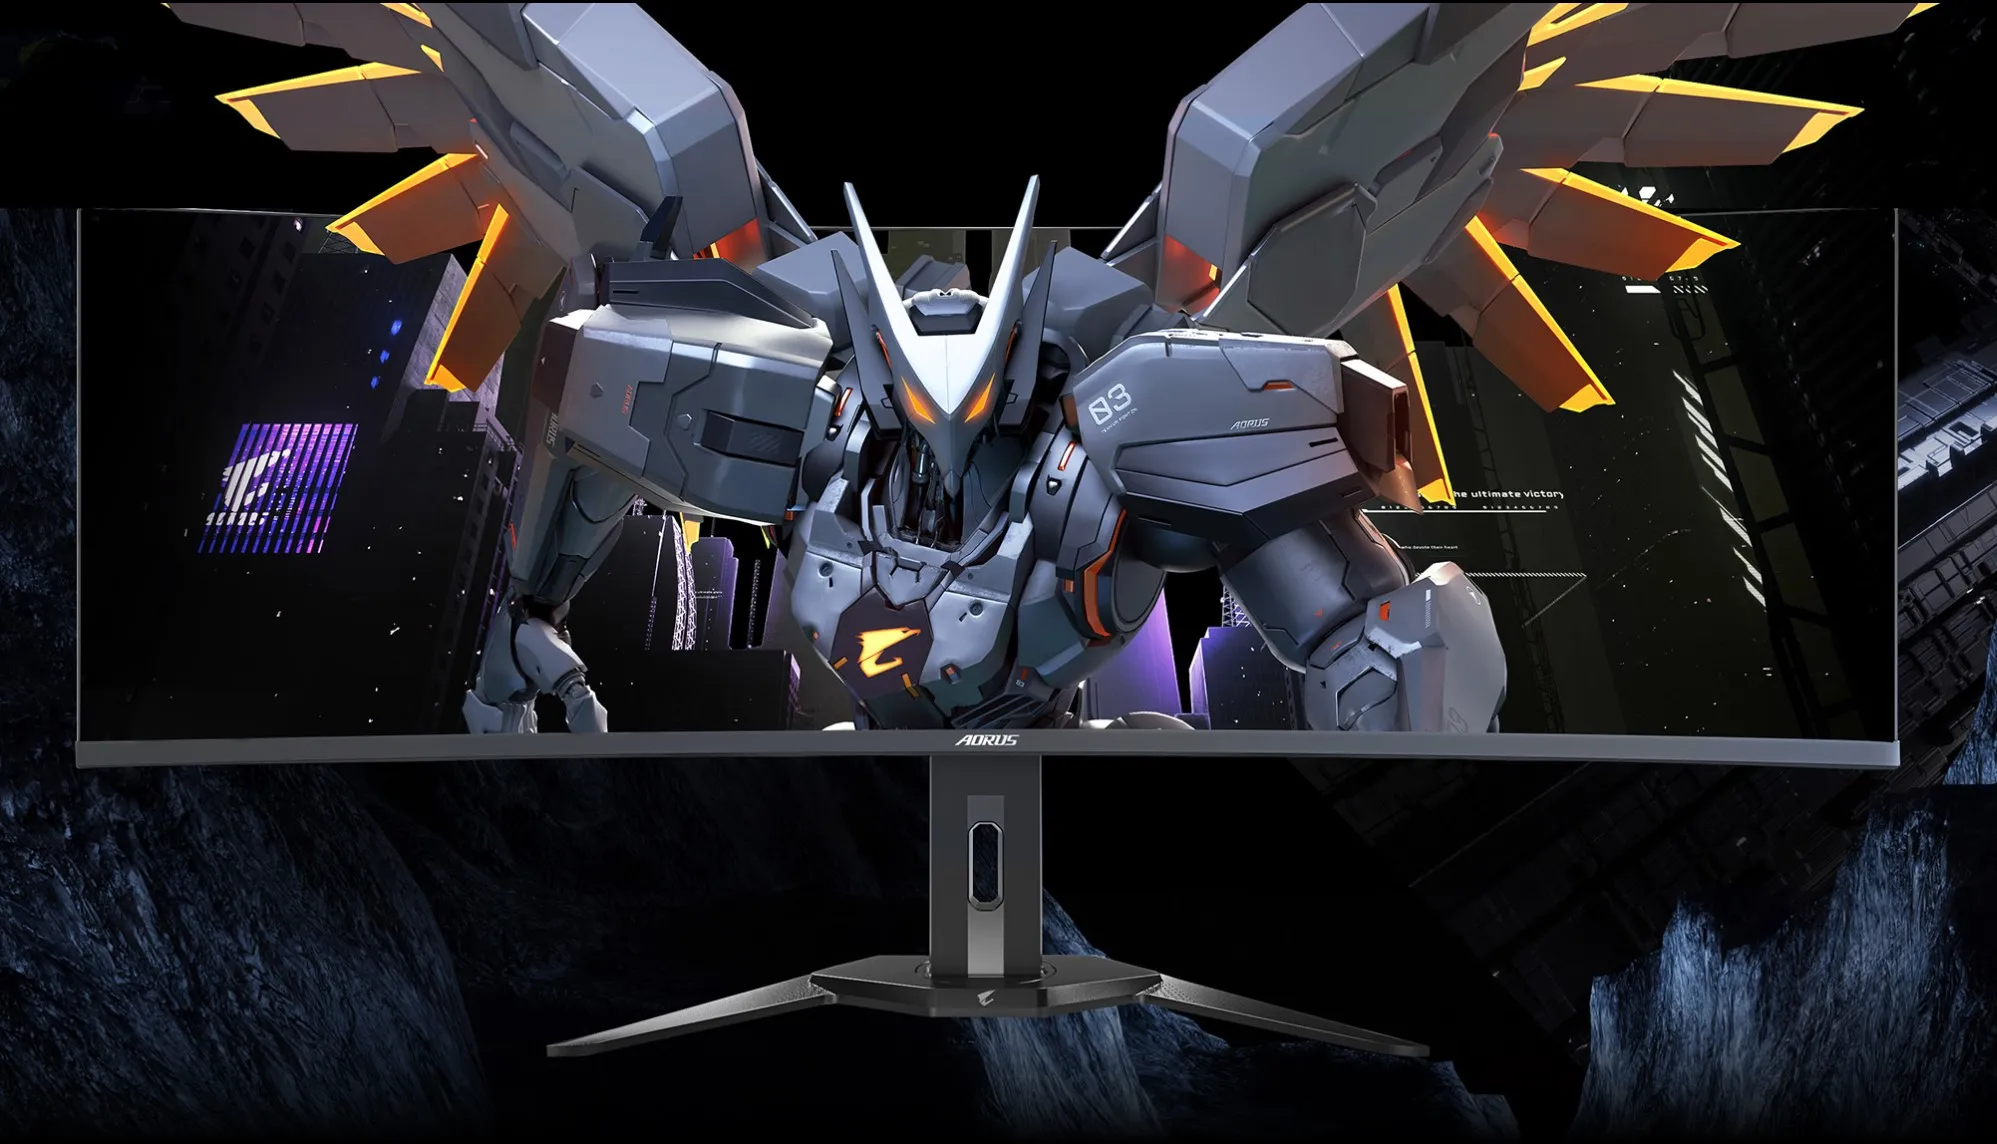 A new Gigabyte Aorus ultrawide monitor with a robotic figure stepping out of it.